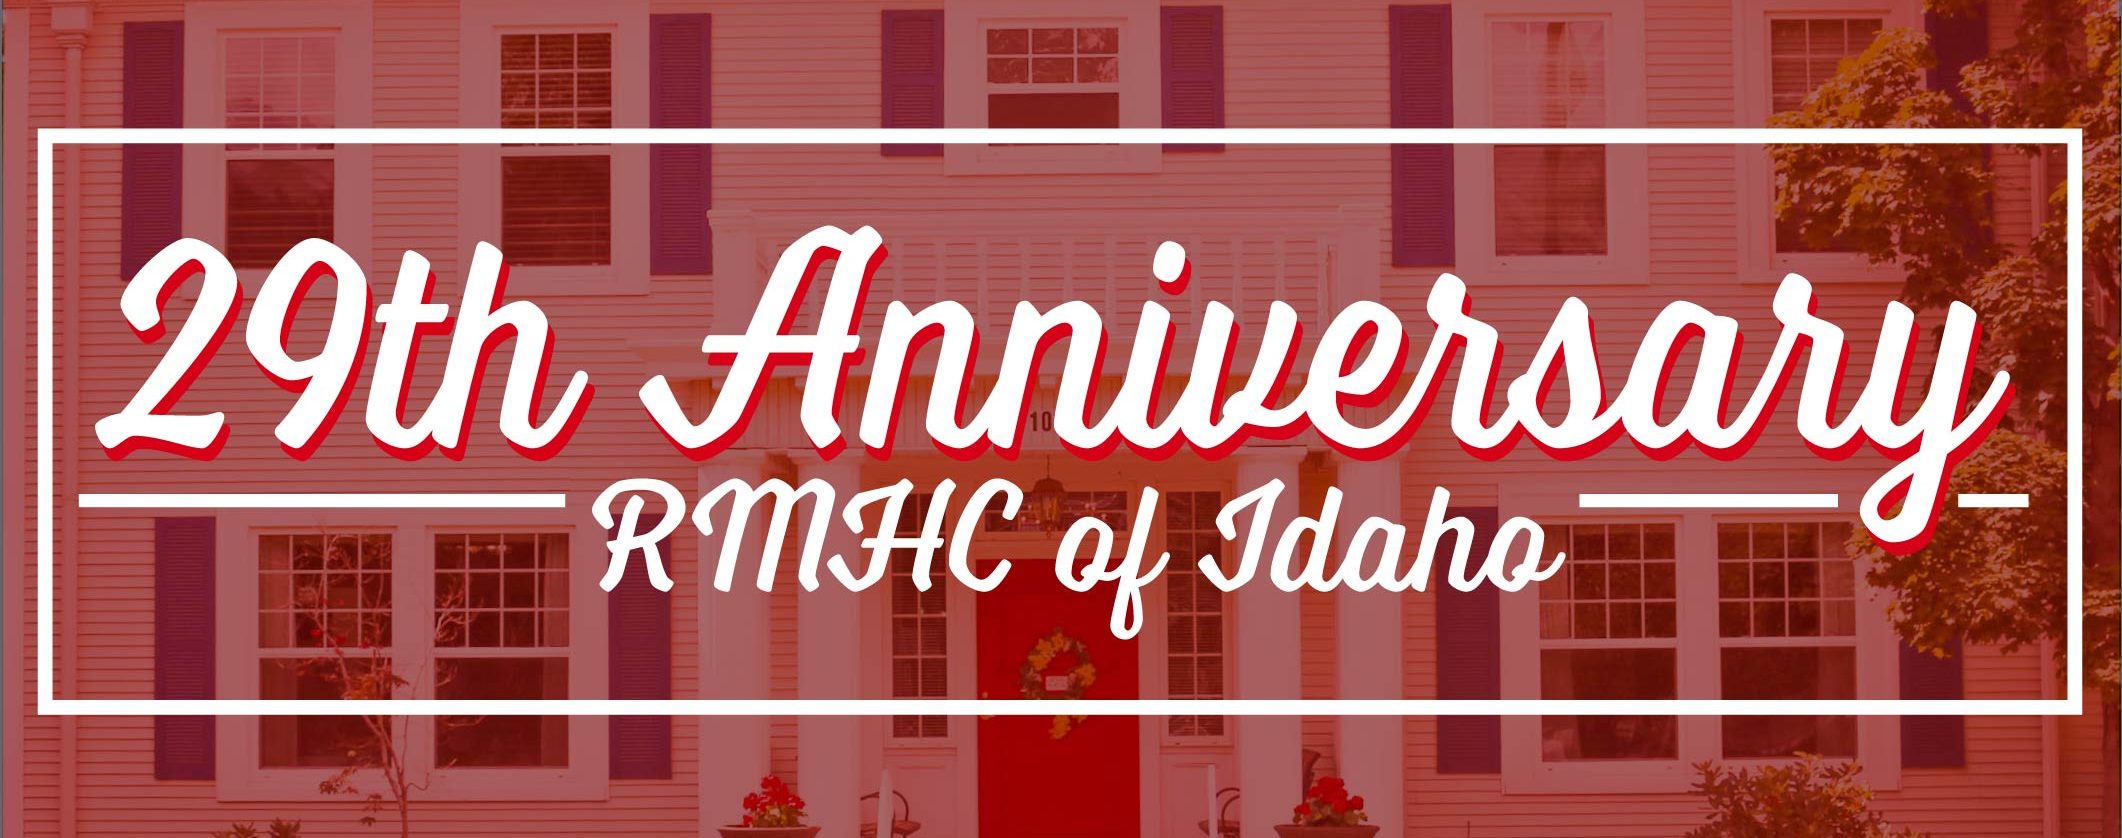 Picture of Idaho RMH with red overlay and the words 29th Anniversary RMHC of Idaho